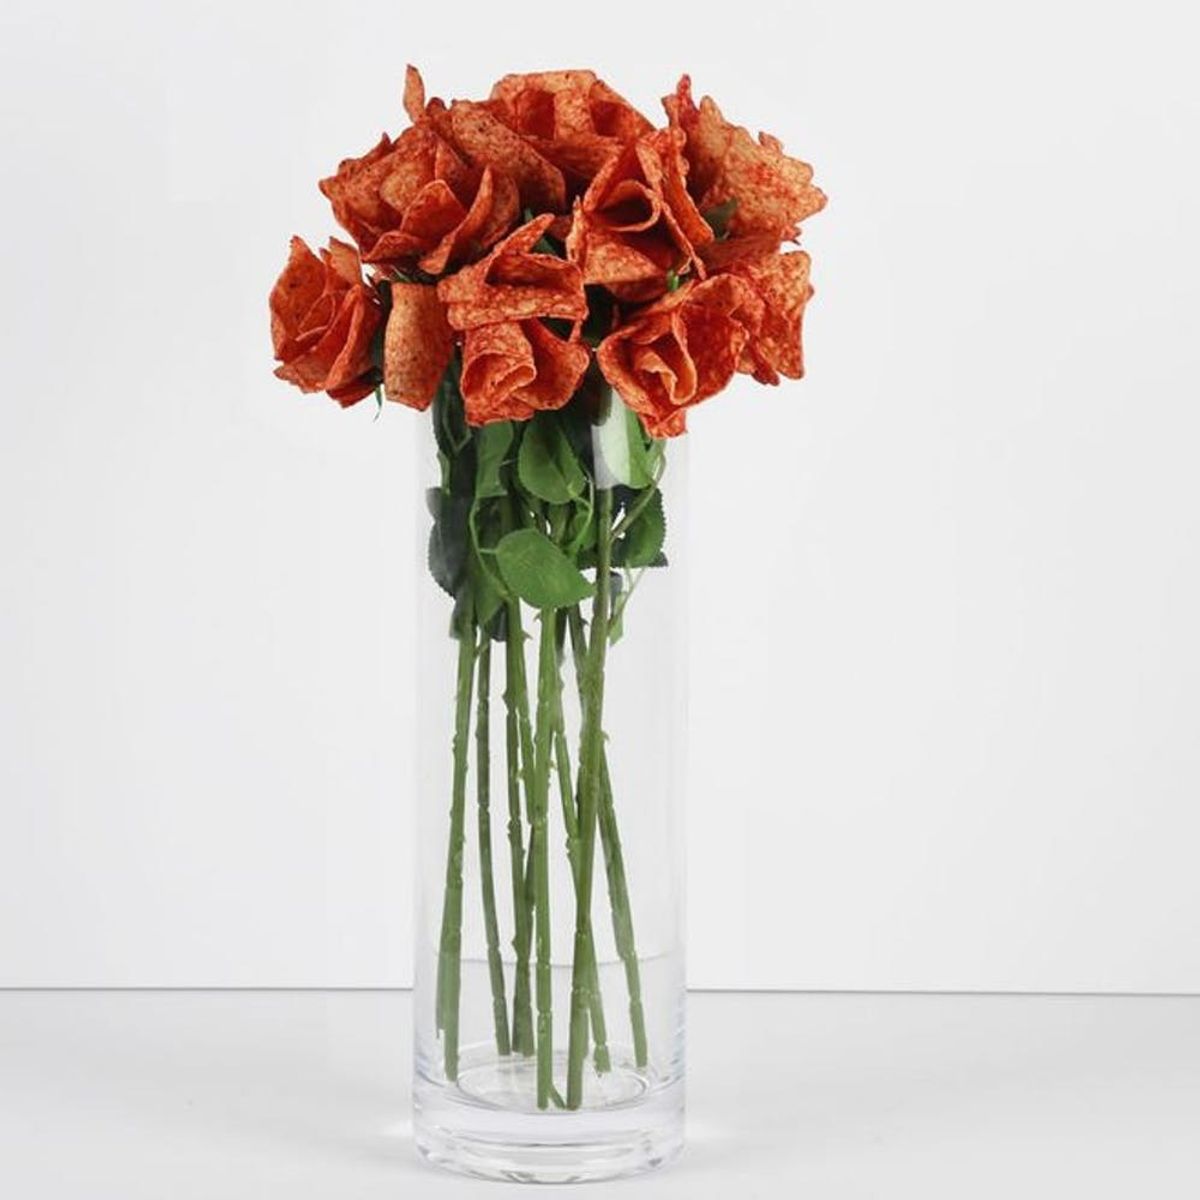 Doritos Roses Are For Real + They Are The Answer to Your Valentine’s Day